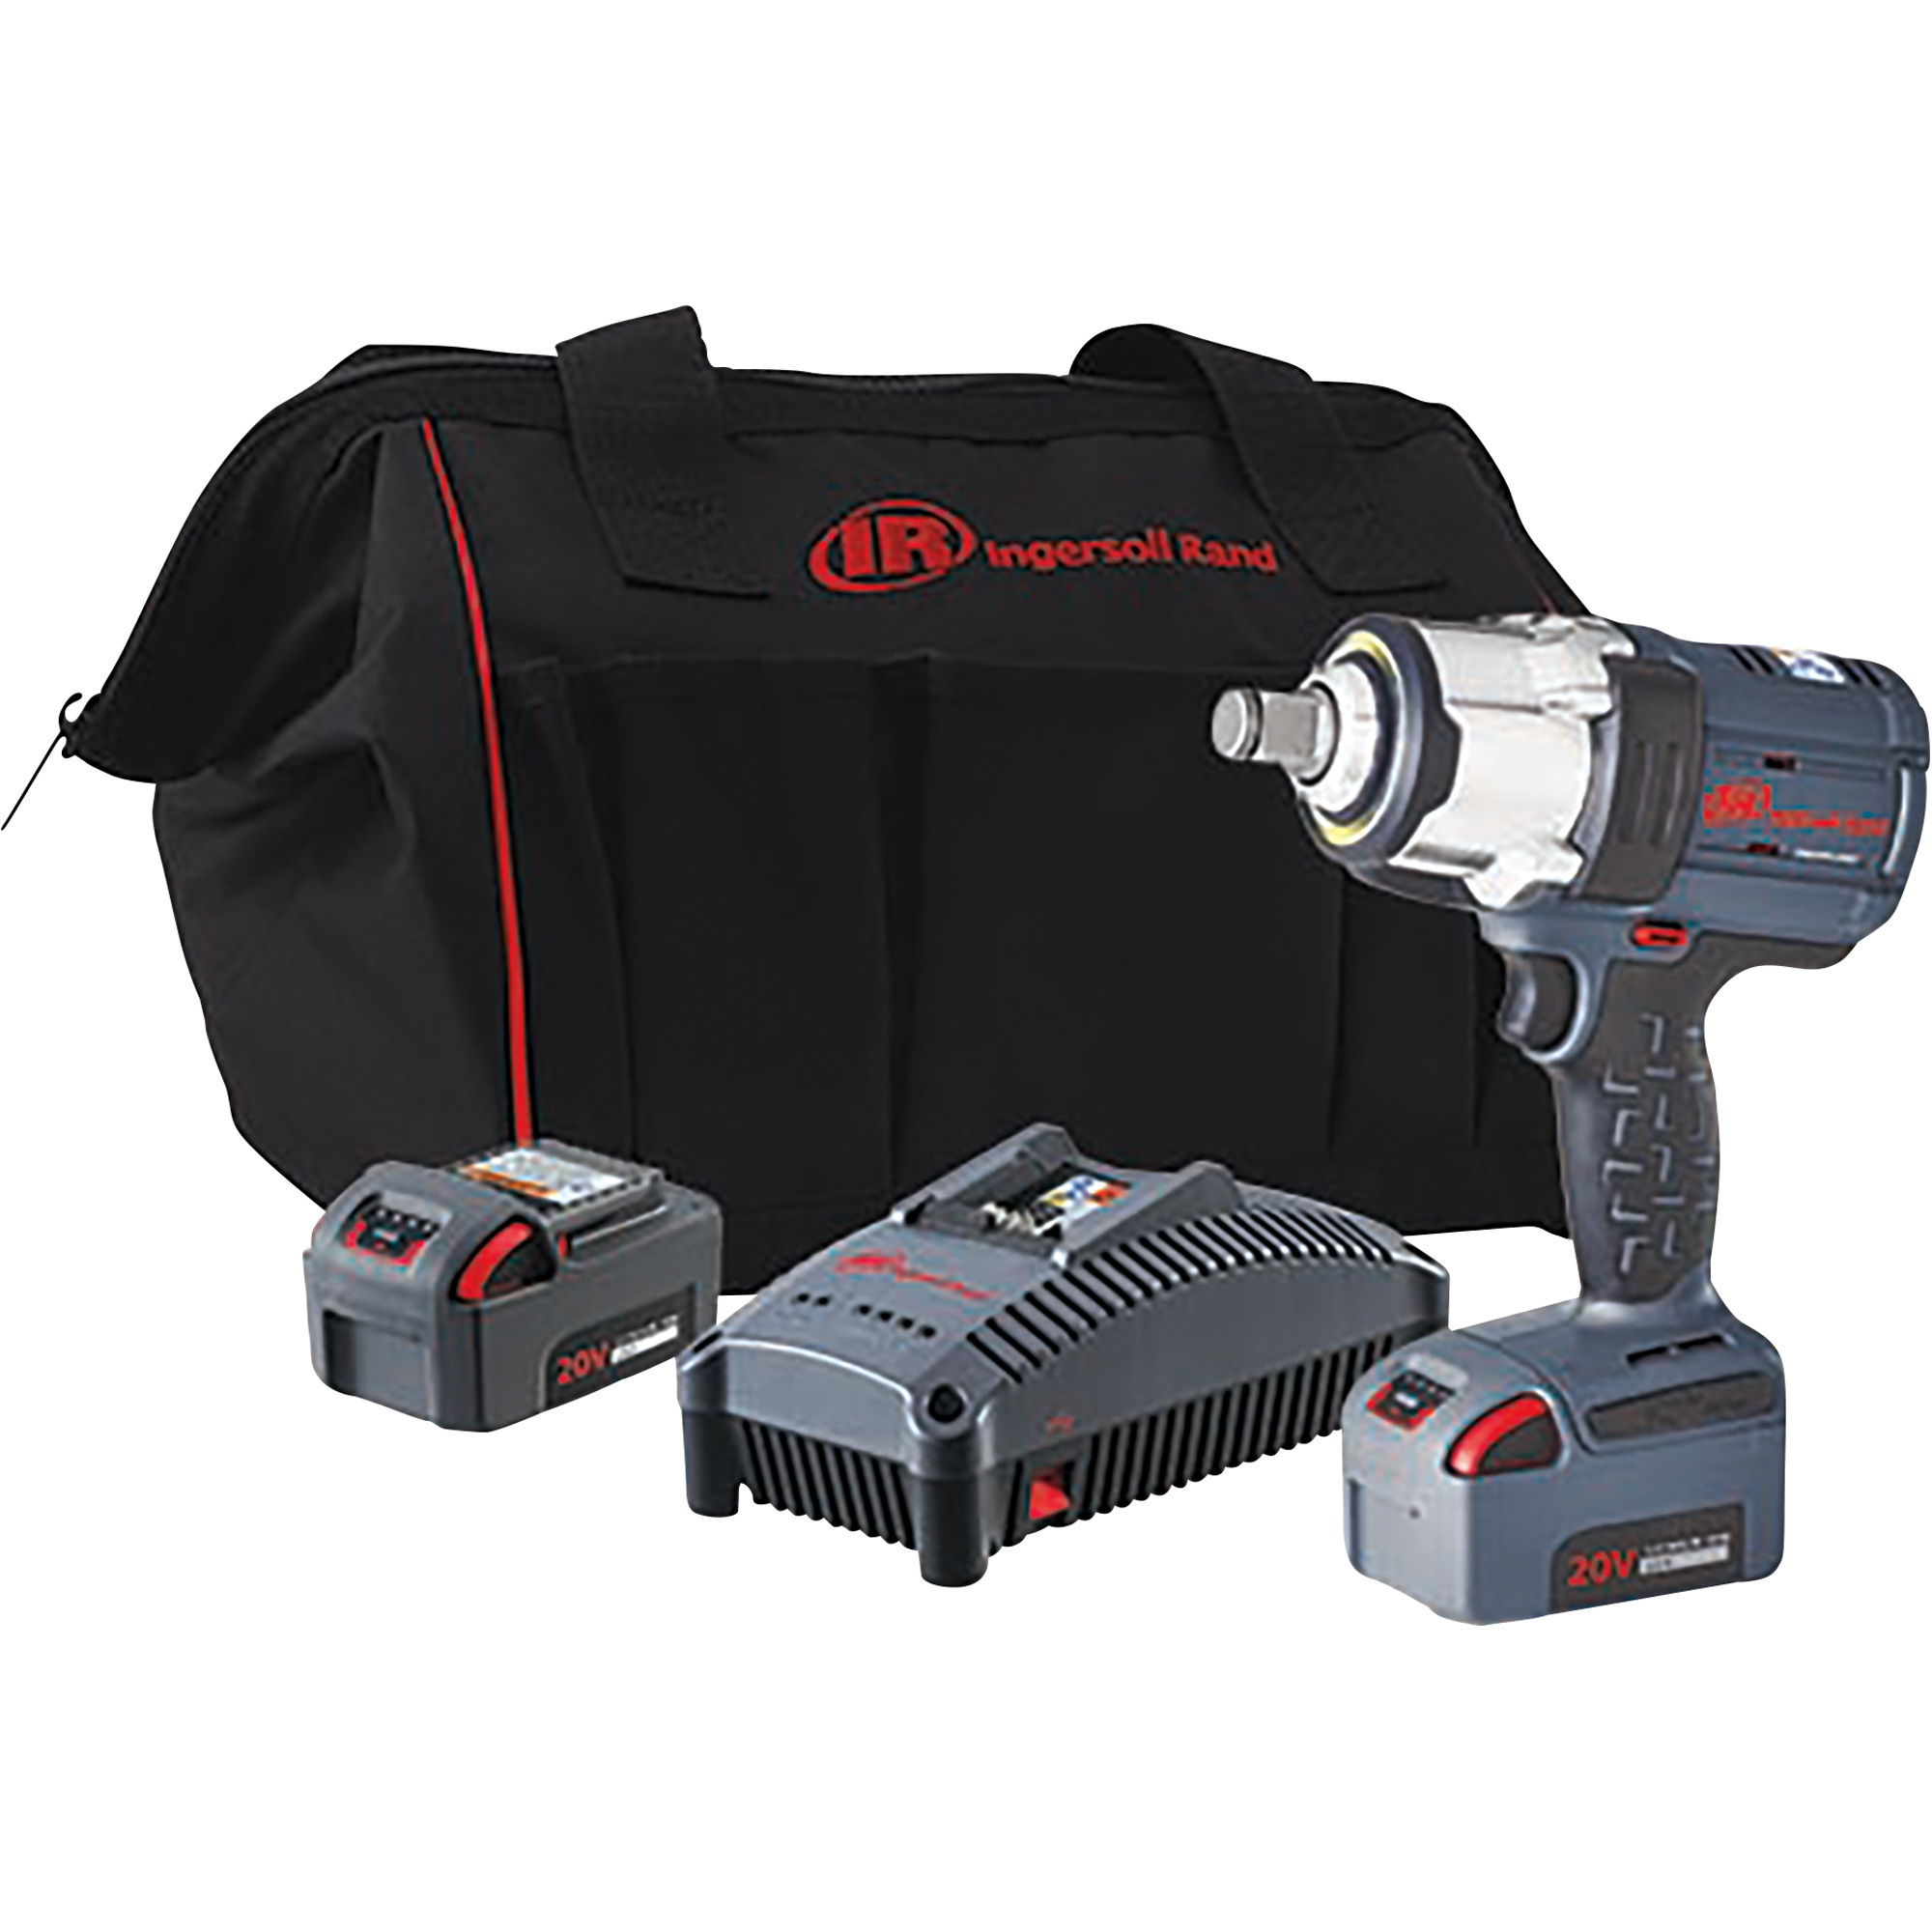 Ingersoll Rand IQV20 Series High-Torque 20V Cordless Impact Wrench Kit, 3/4Inch Drive, 1000 Ft./Lbs. Max Torque, 2 Batteries, Model W7172-K22